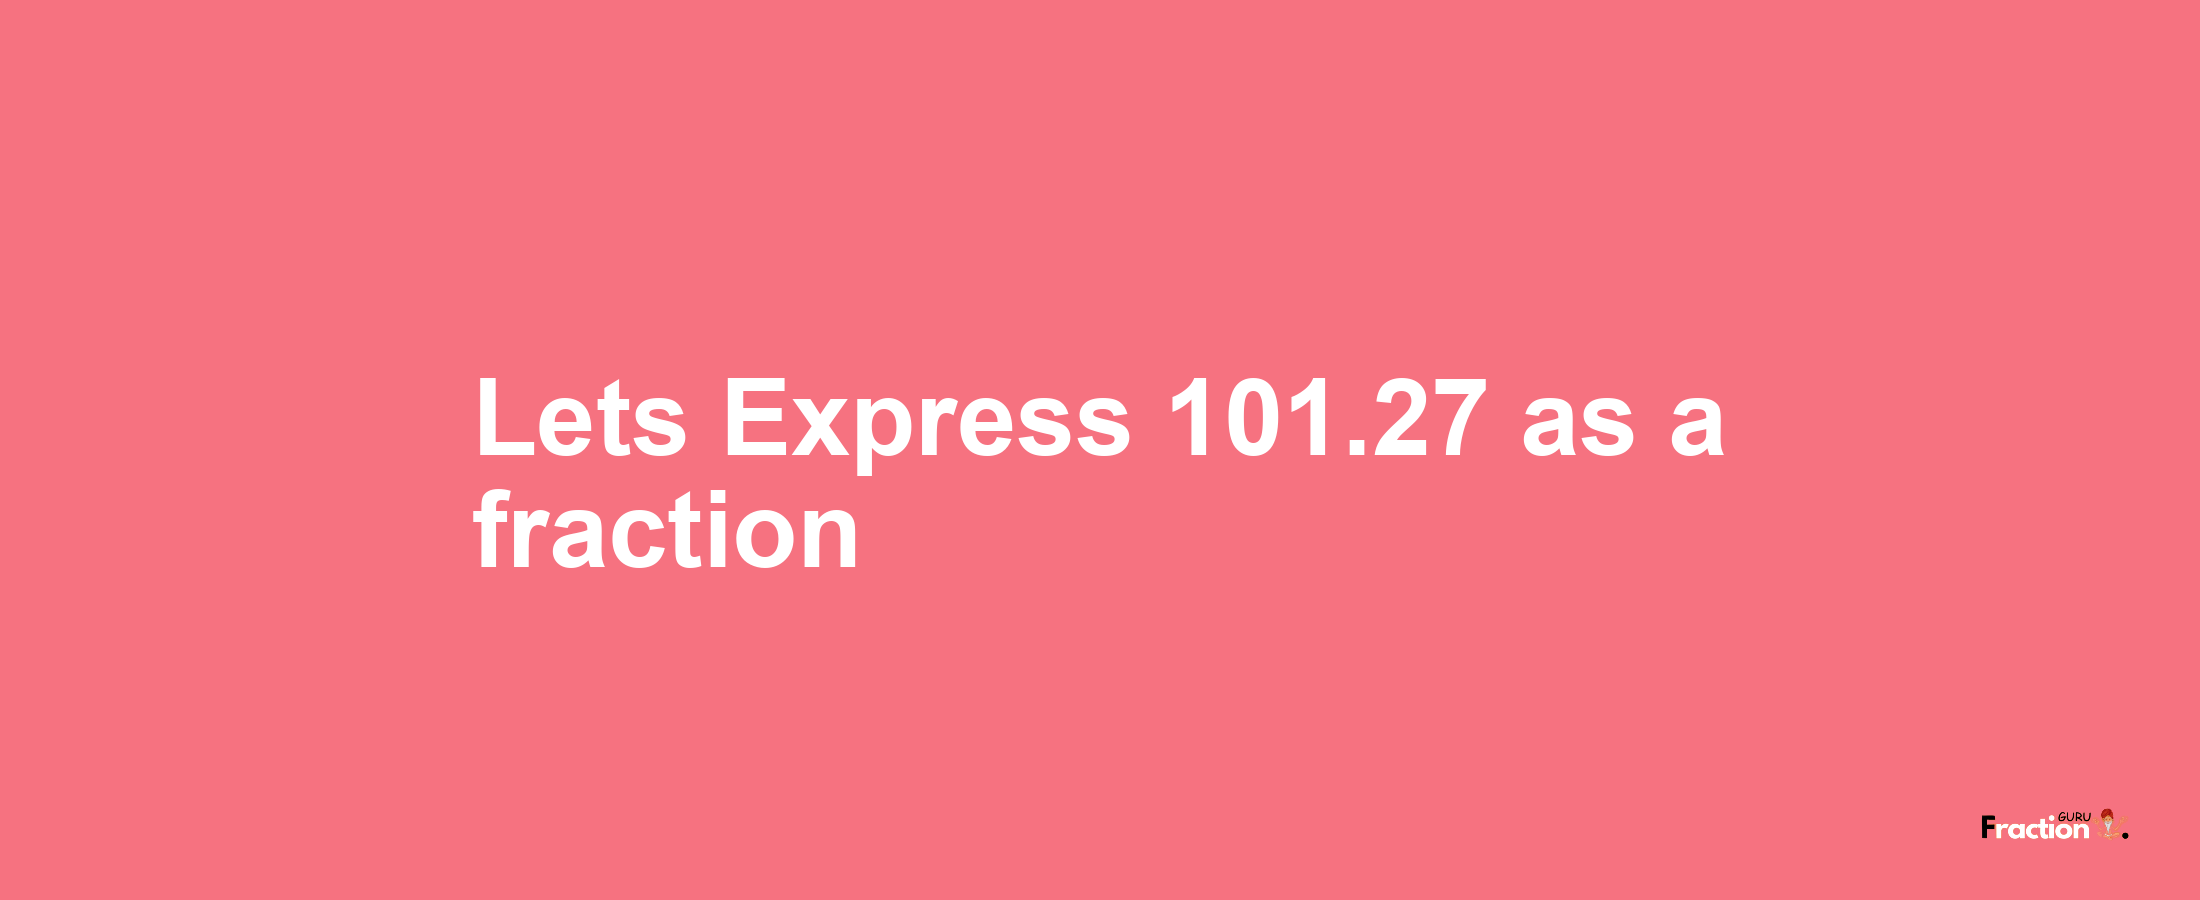 Lets Express 101.27 as afraction